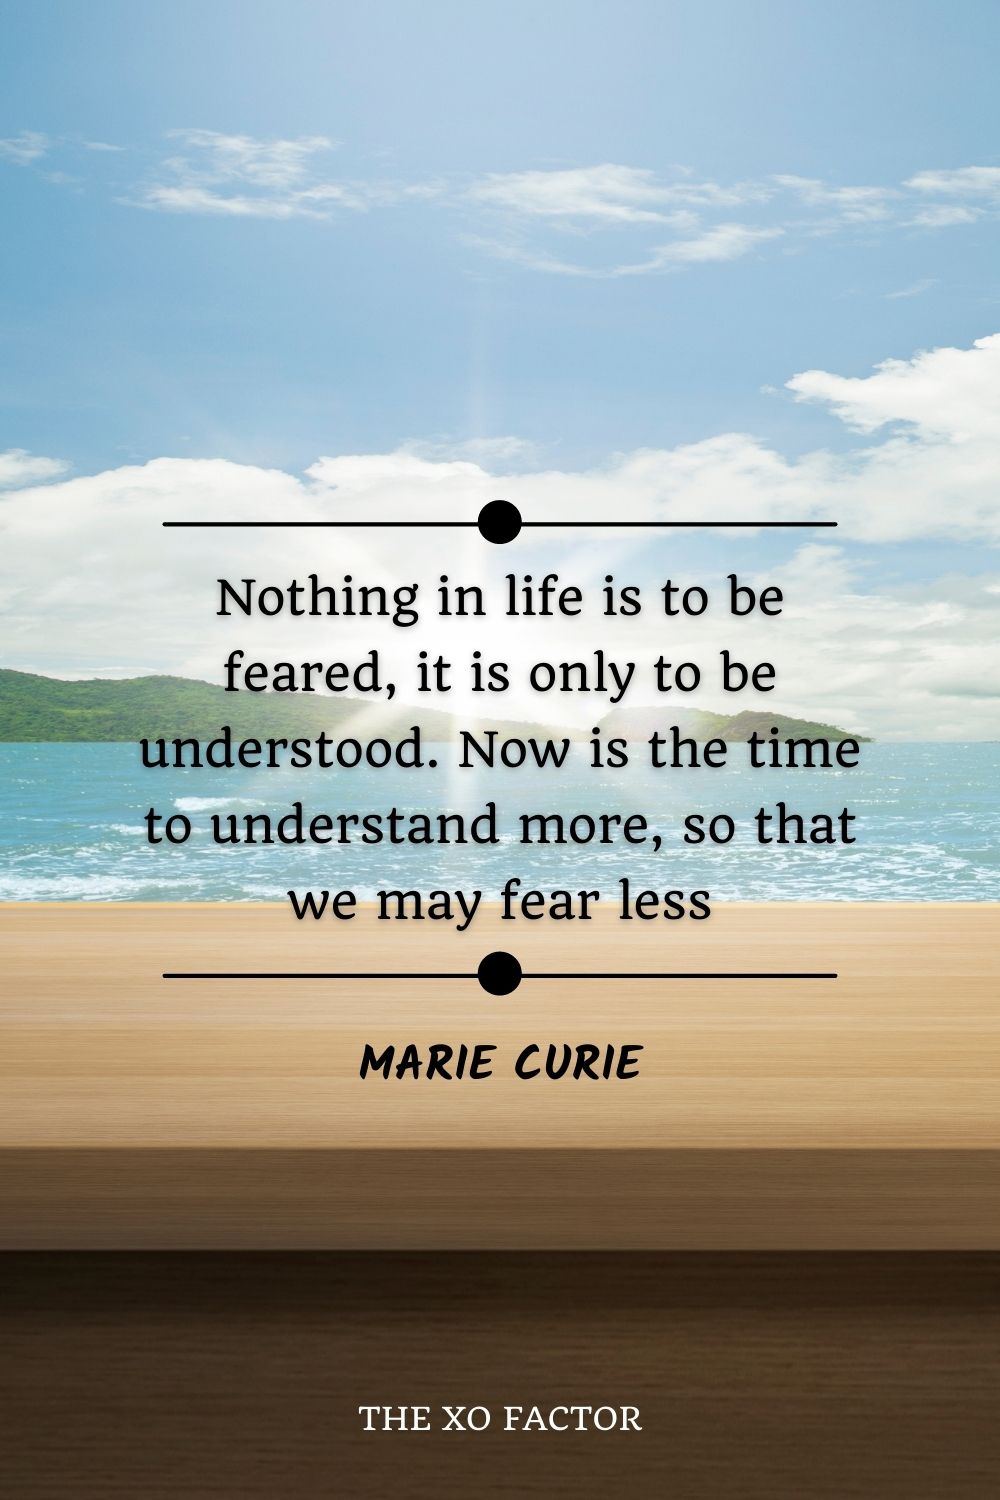 Nothing in life is to be feared, it is only to be understood. Now is the time to understand more, so that we may fear less.” ― Marie Curie